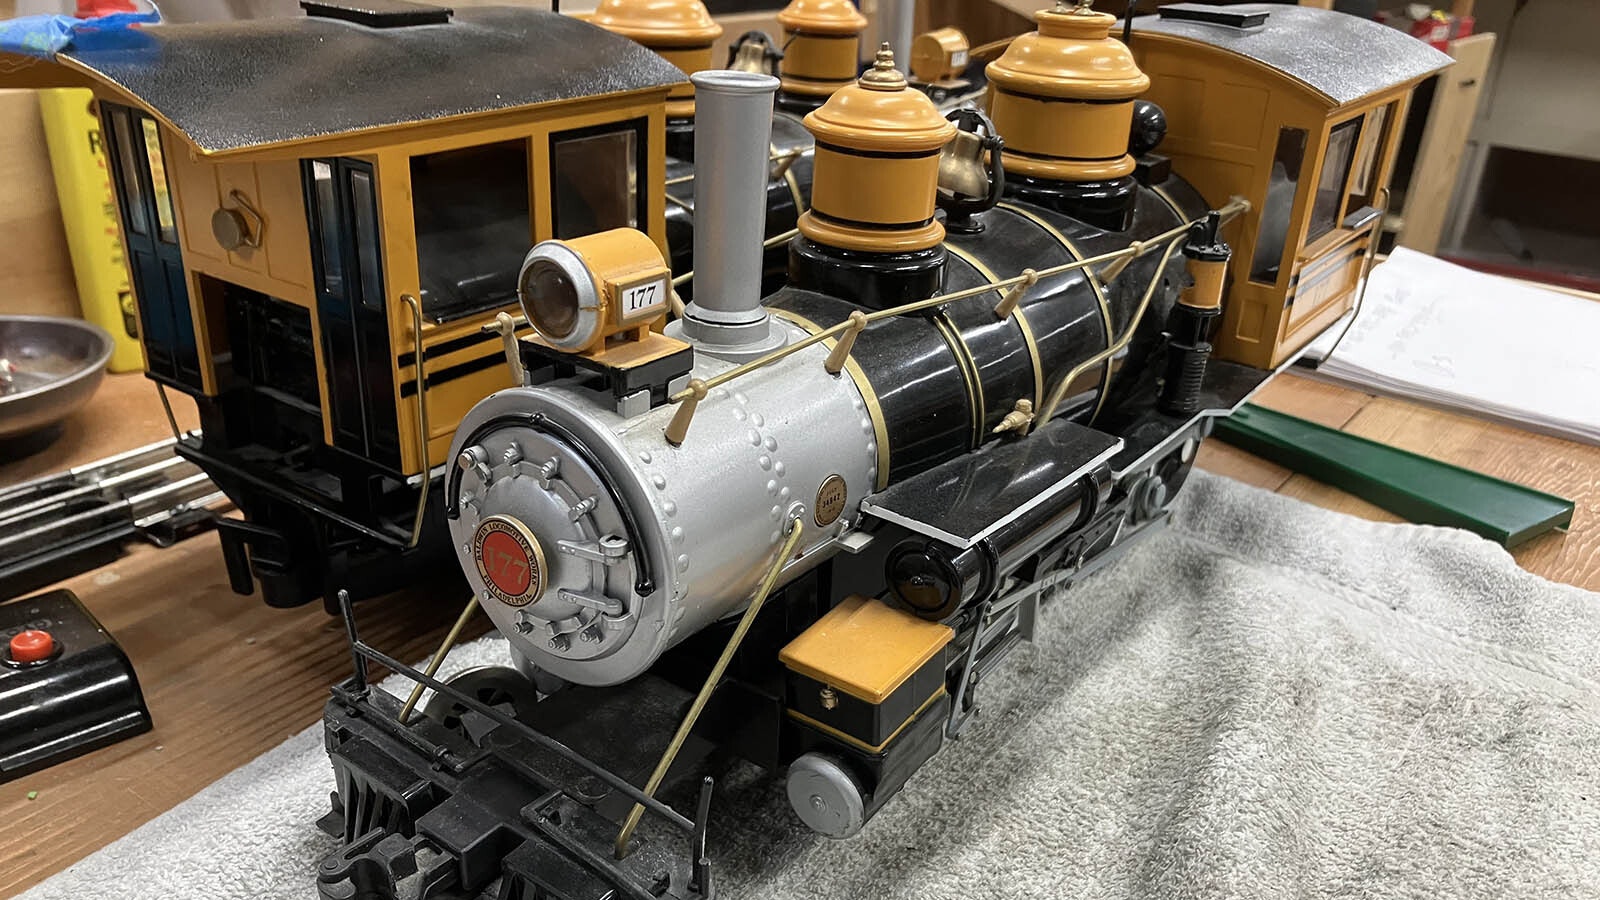 In addition to the N, HO, S, and O-scale model trains, the Casper club was gifted a pair of G-gauge locomotives that generally are part of outdoor displays.